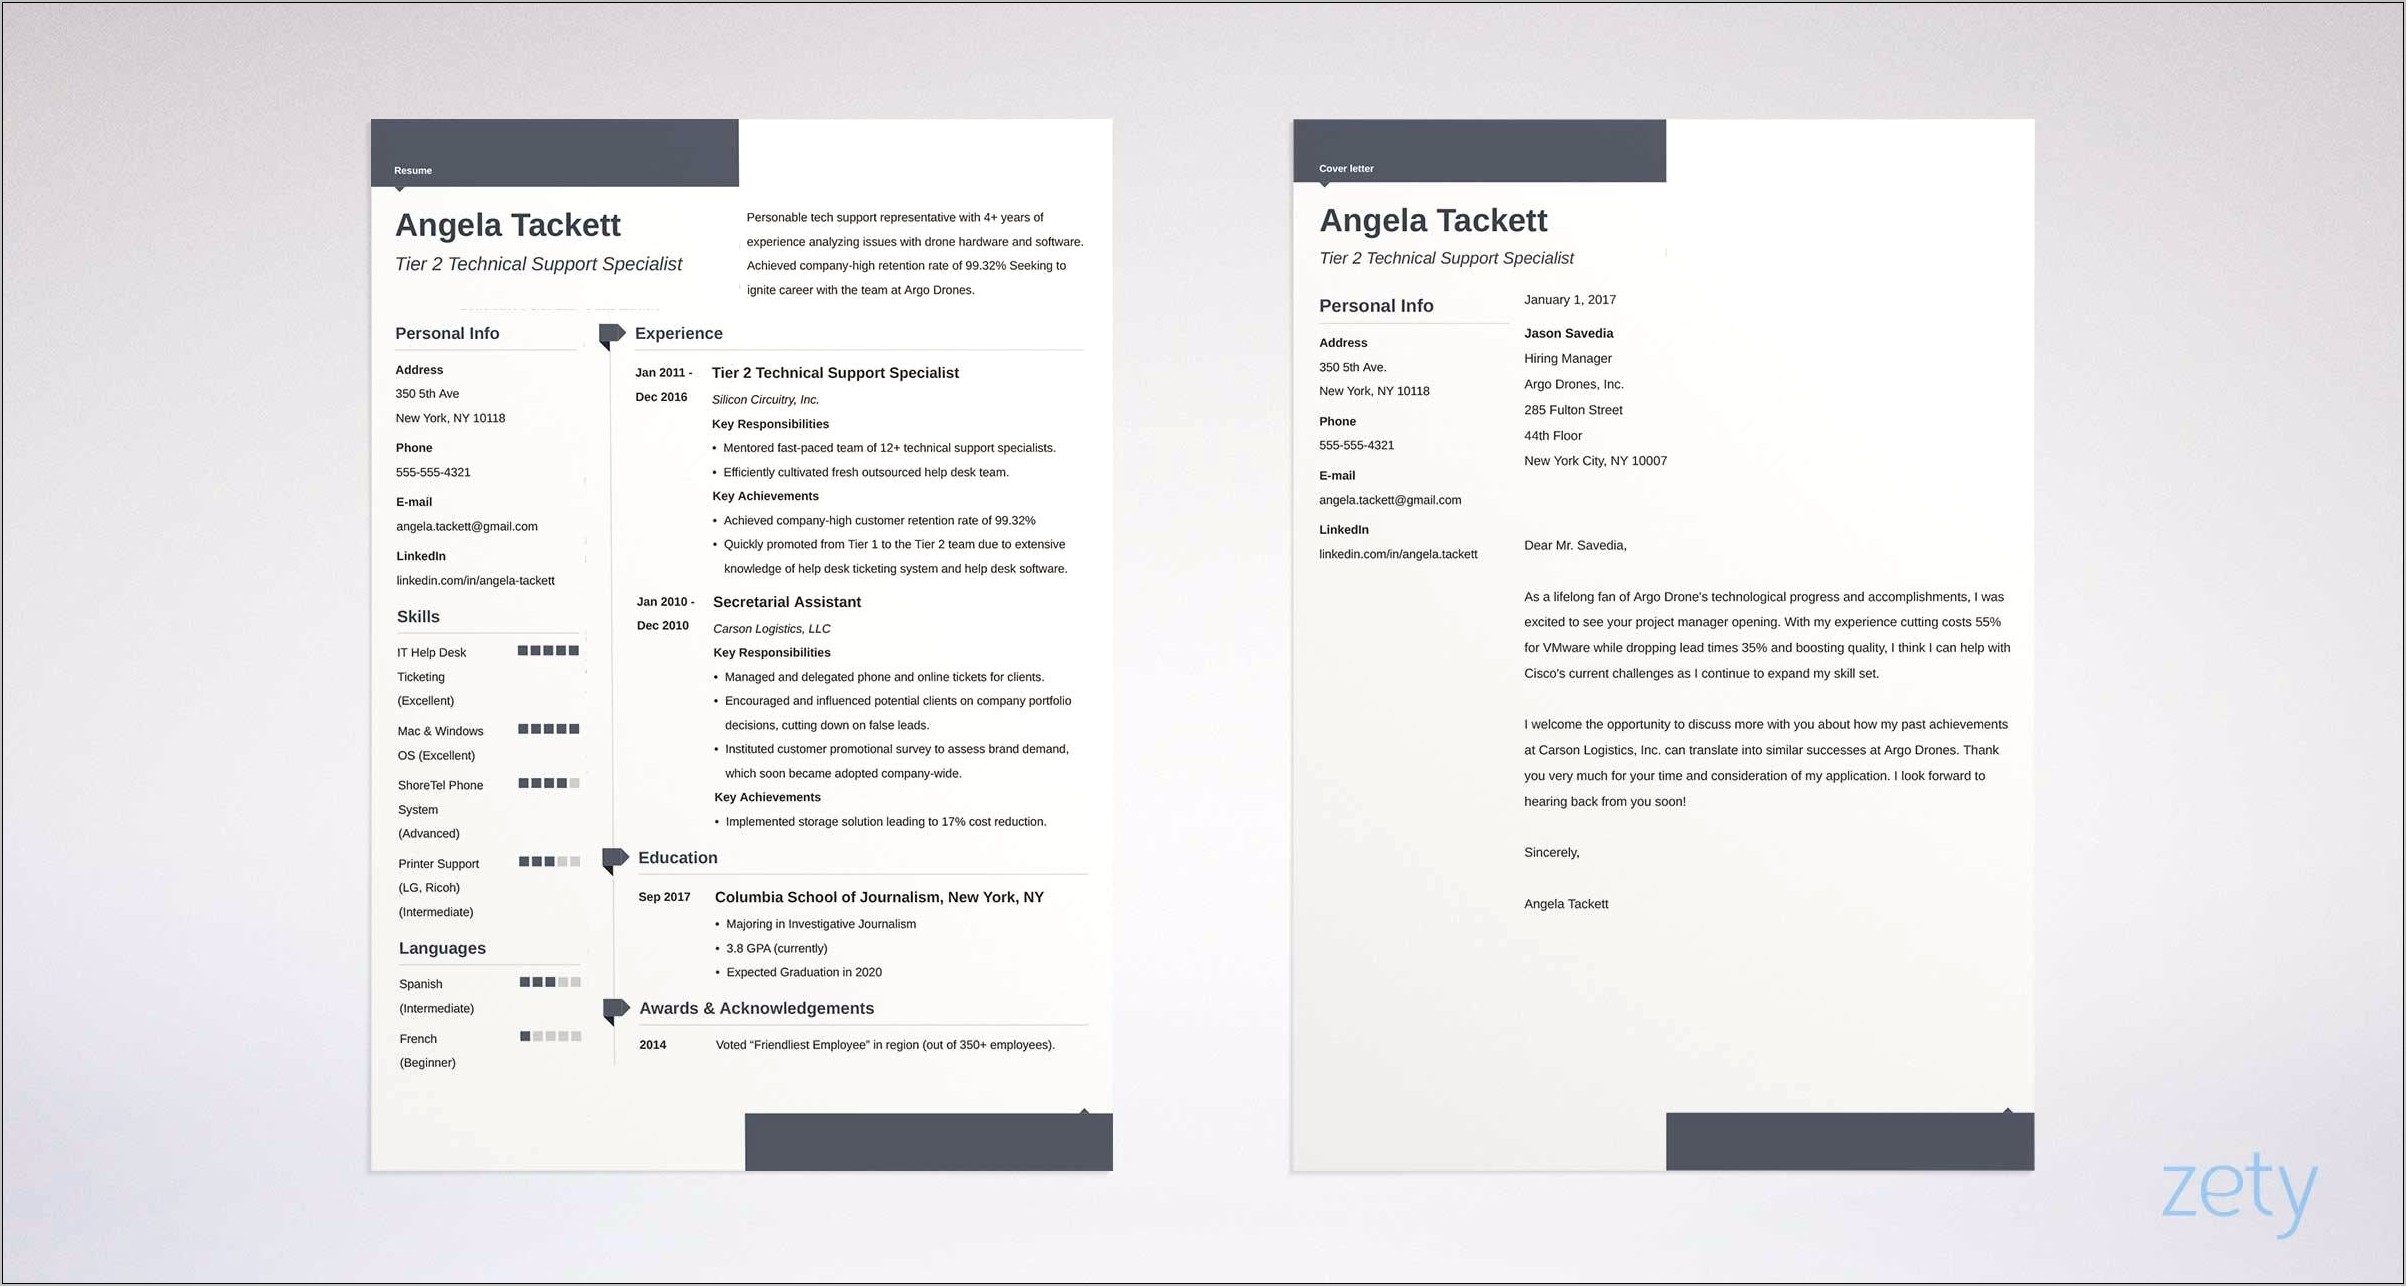 Download Free Professional Resume Templates Word Best